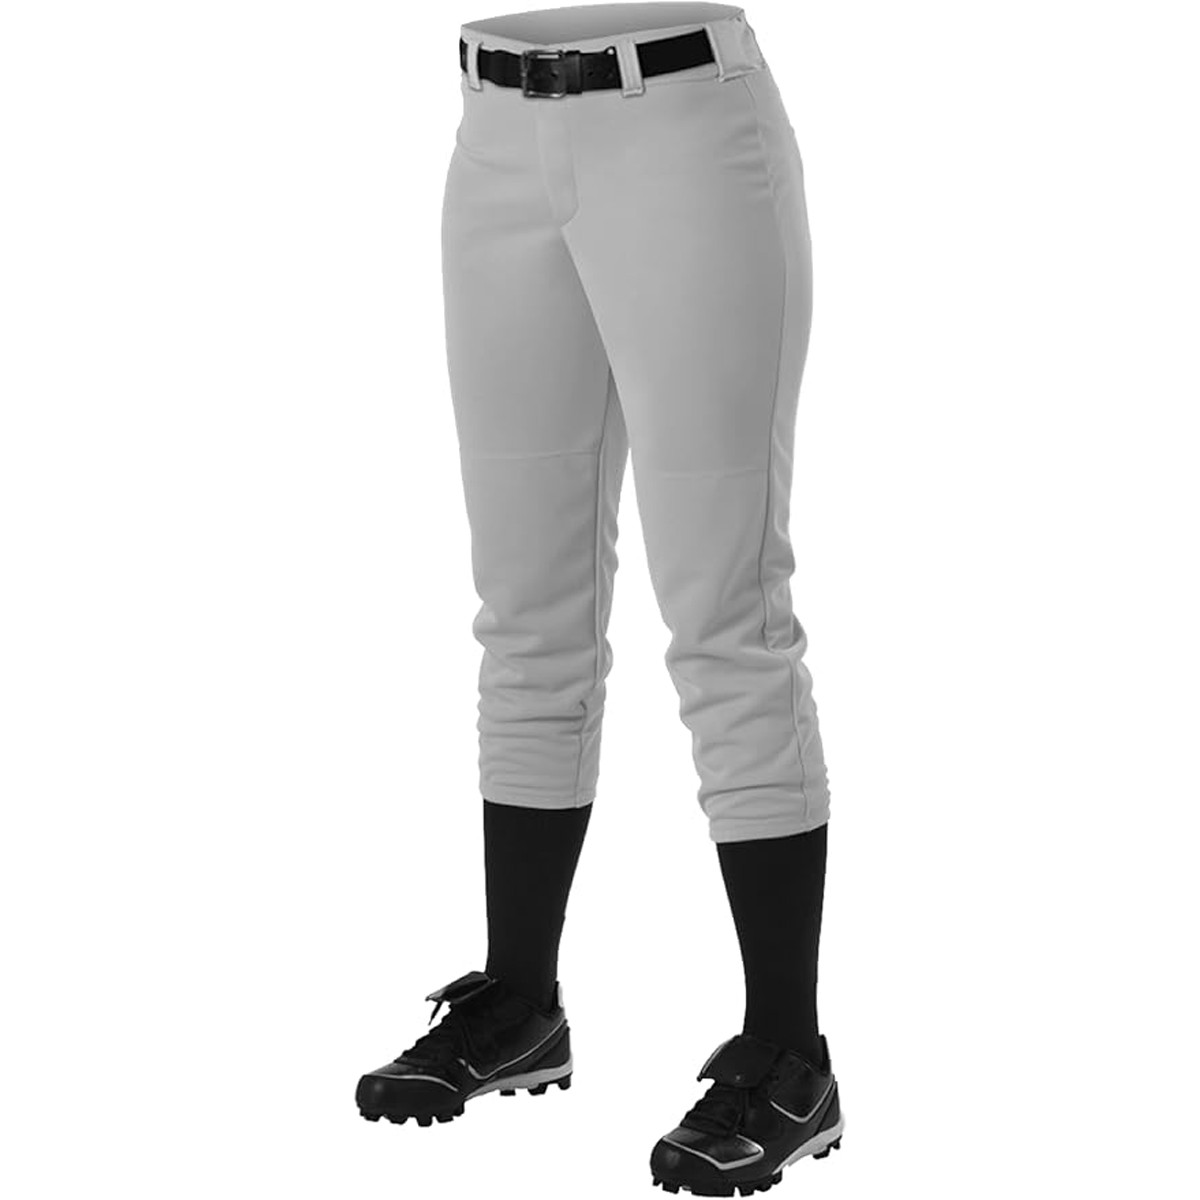 Alleson Women's Fastpitch Softball Pants